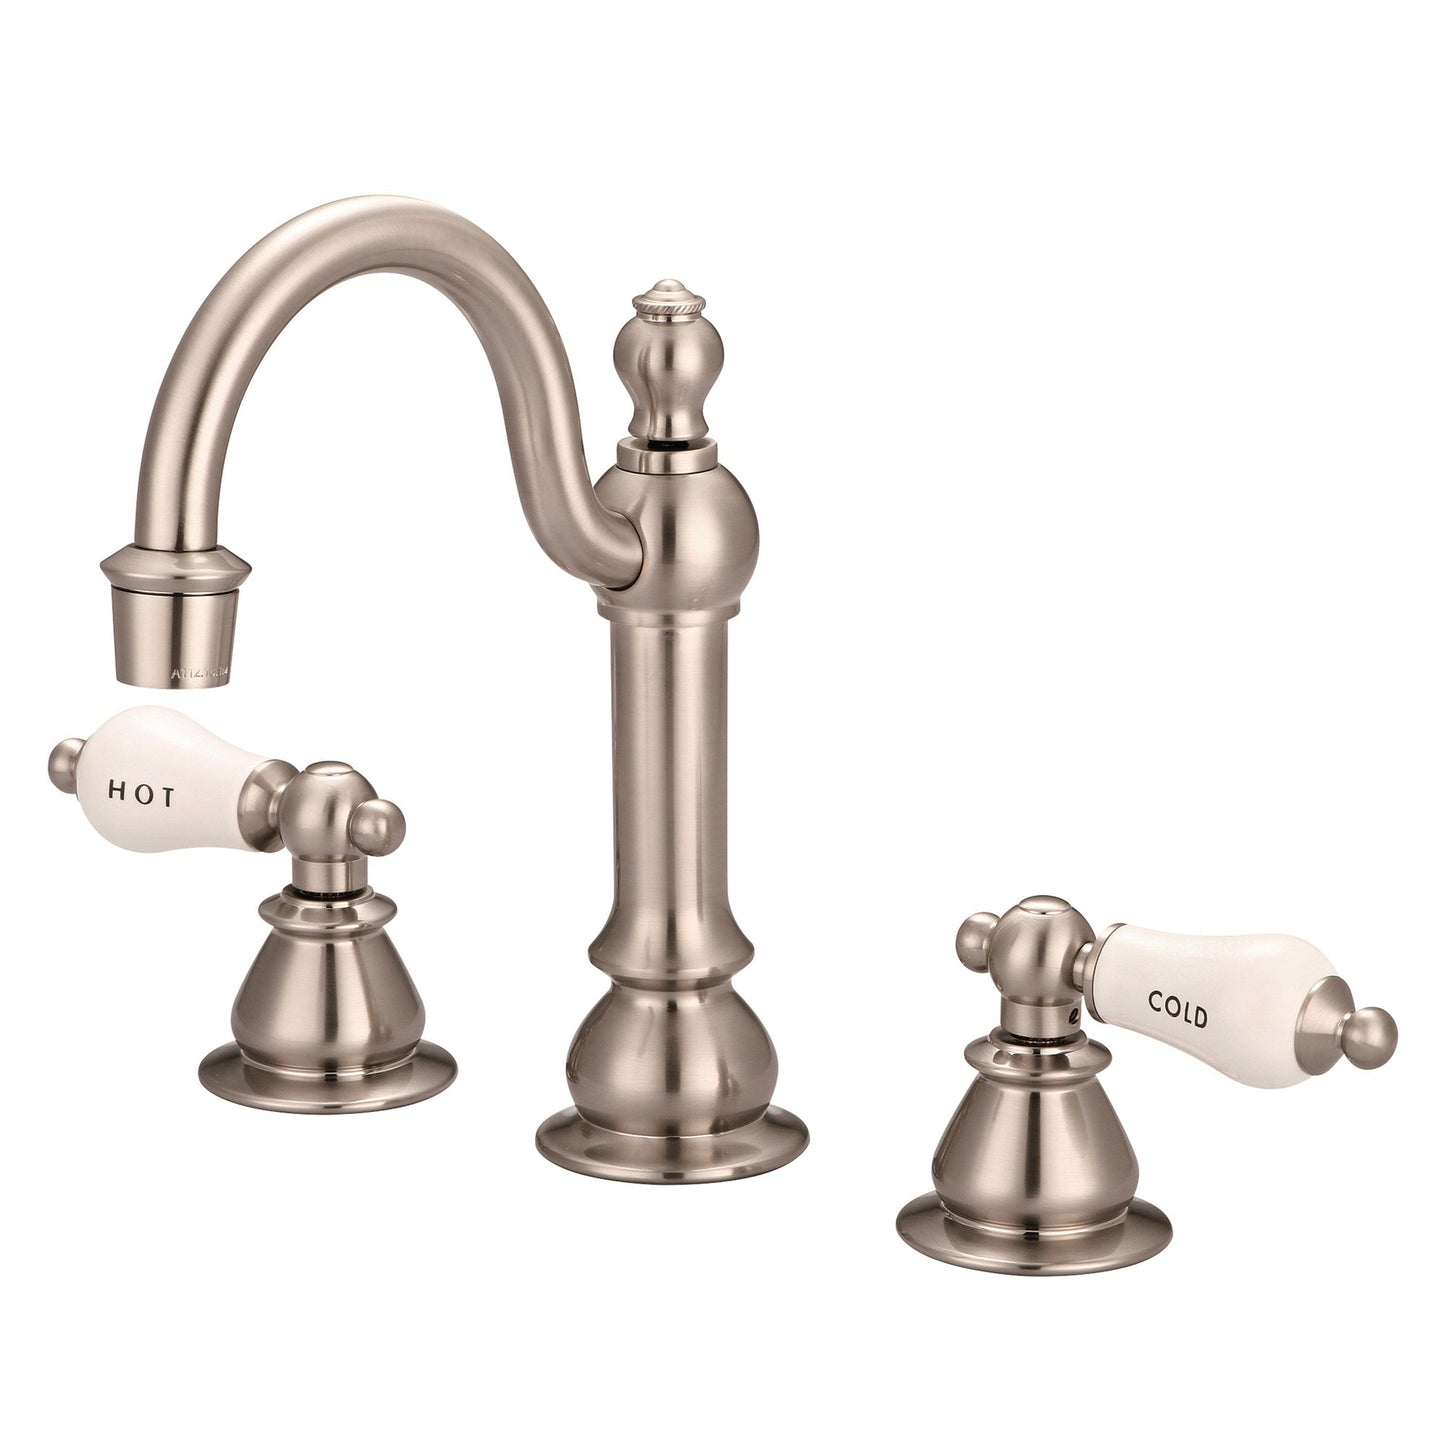 Water Creation American 20th Century Classic Widespread Lavatory F2-0012 8" Grey Solid Brass Faucet With Pop-Up Drain And Porcelain Lever Handles, Hot And Cold Labels Included